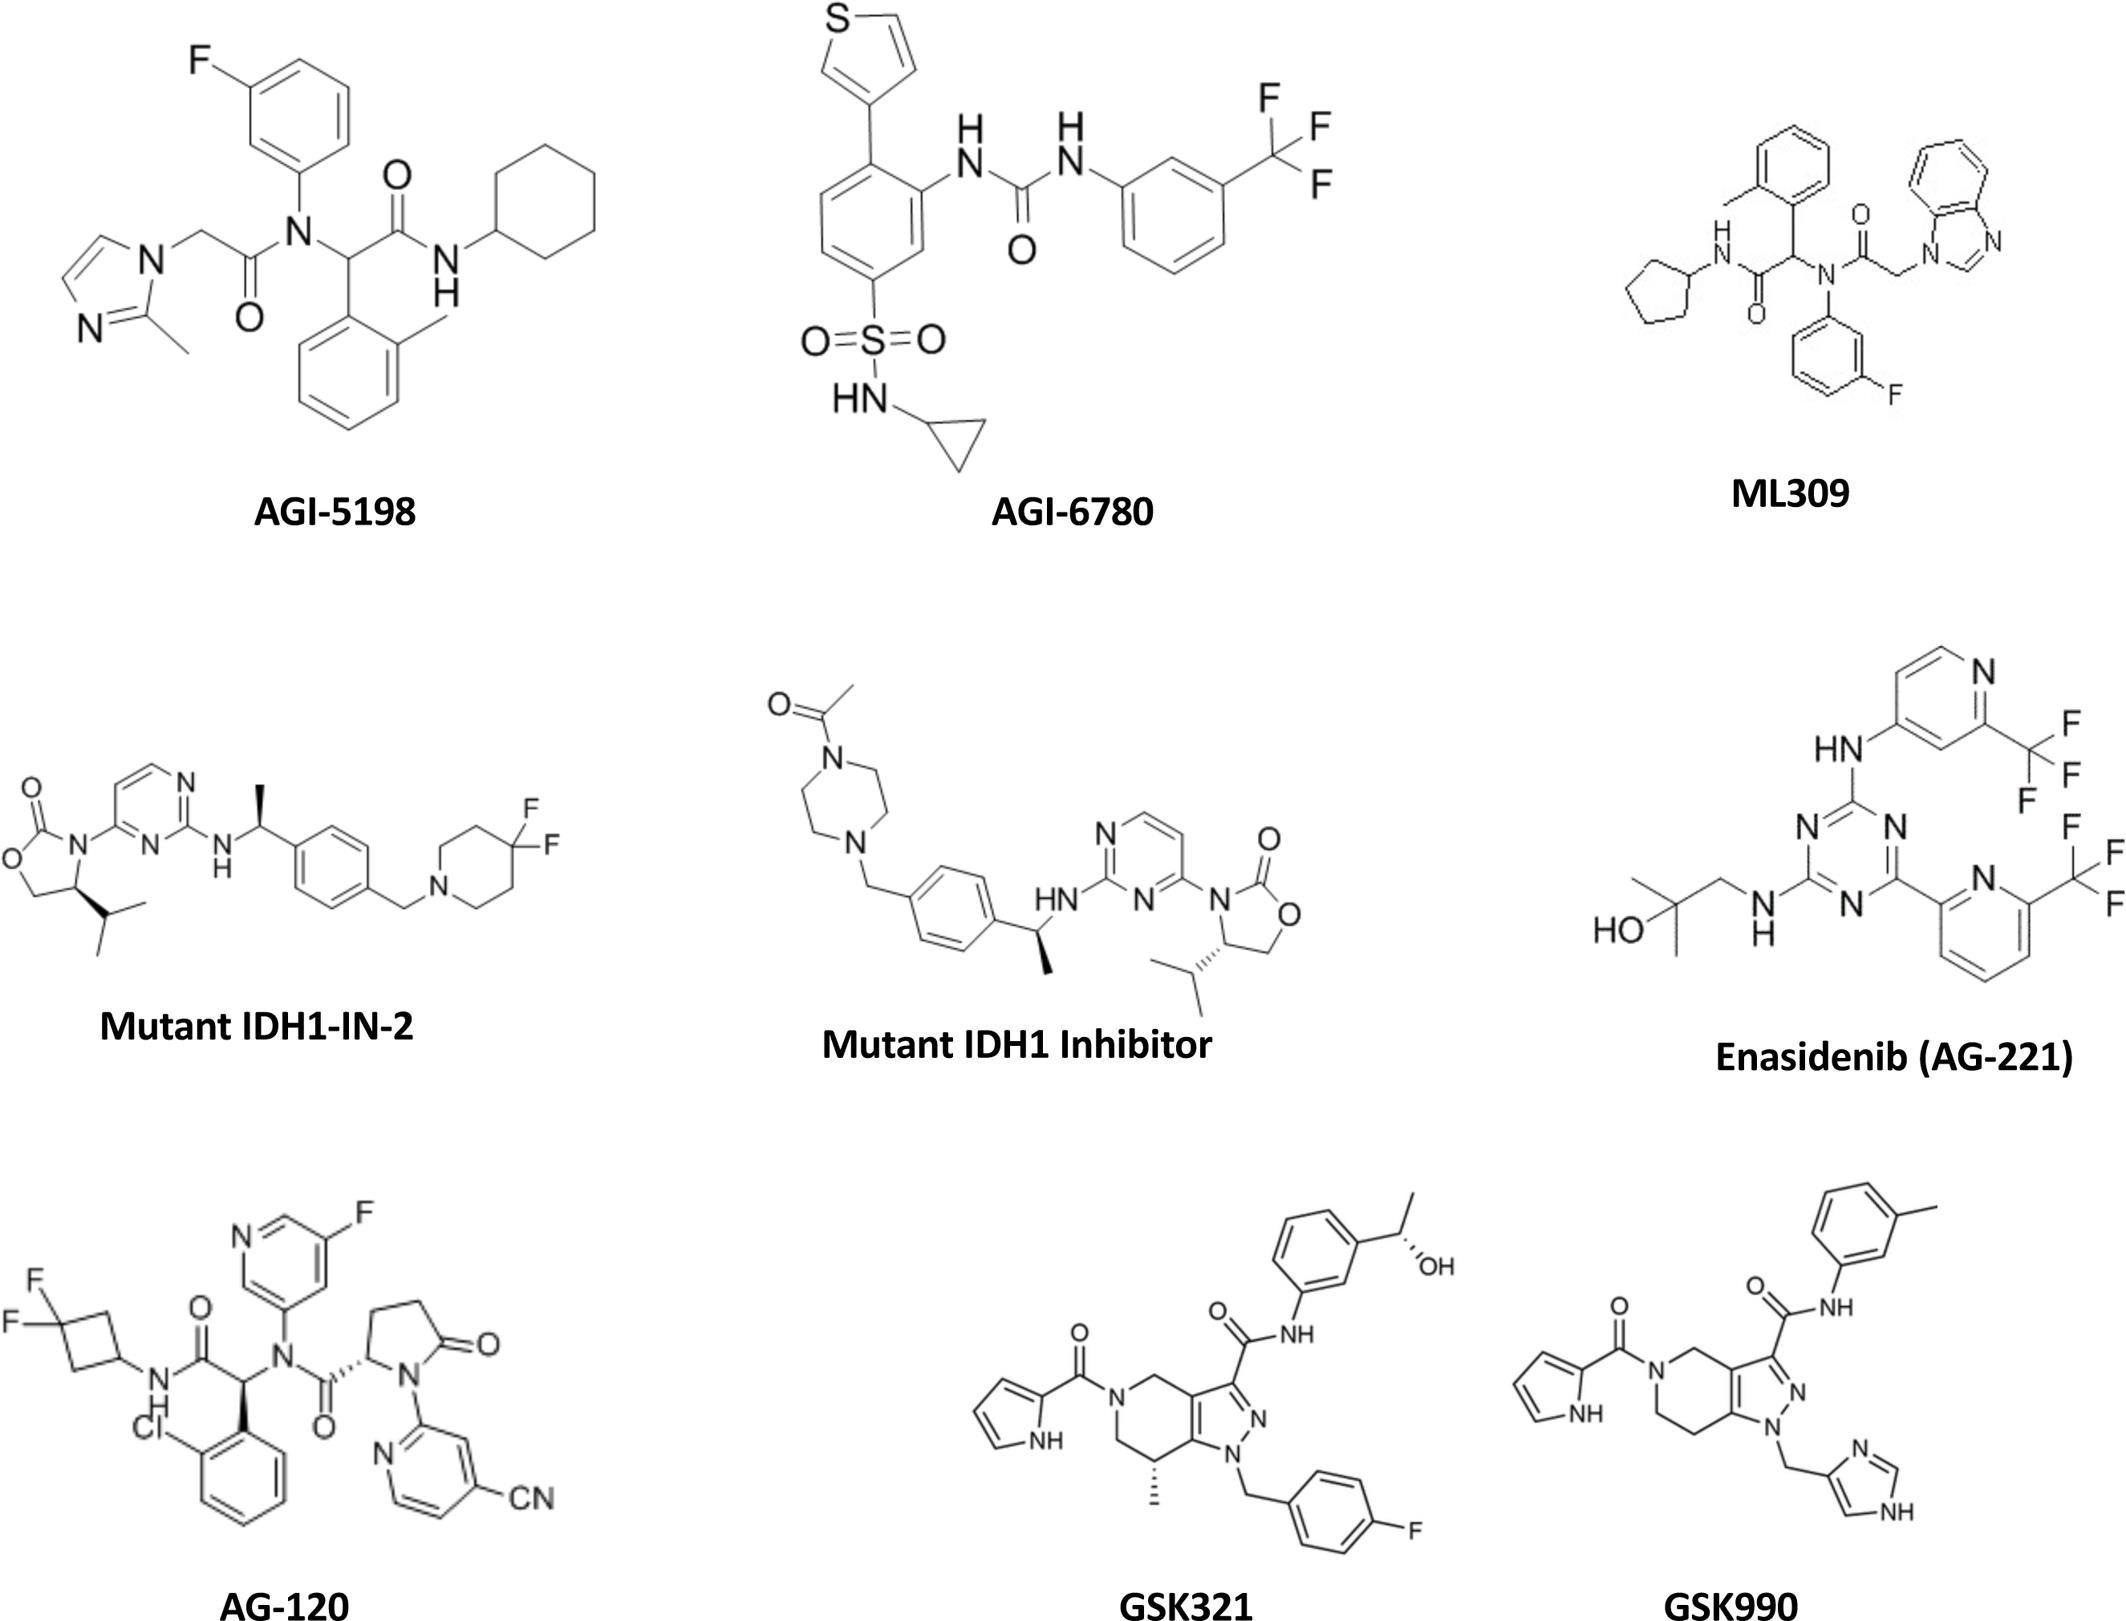 Chemical structures of IDH inhibitors.